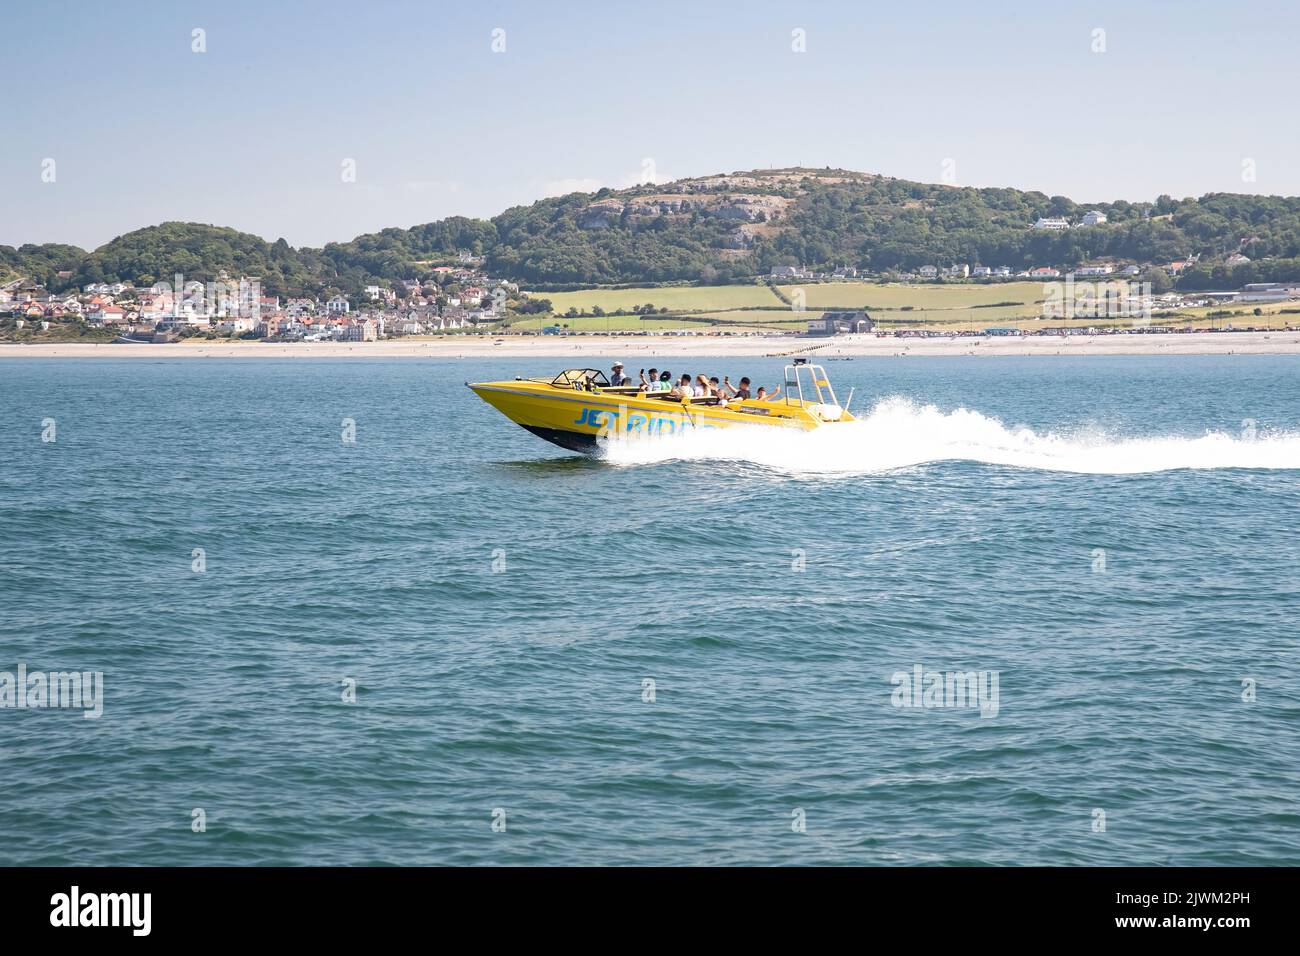 Tourists at Llandudno's North Shore enjoying a seaside power boat trip around the bay in mid Summer between the Great Orme and Little Orme headlands Stock Photo